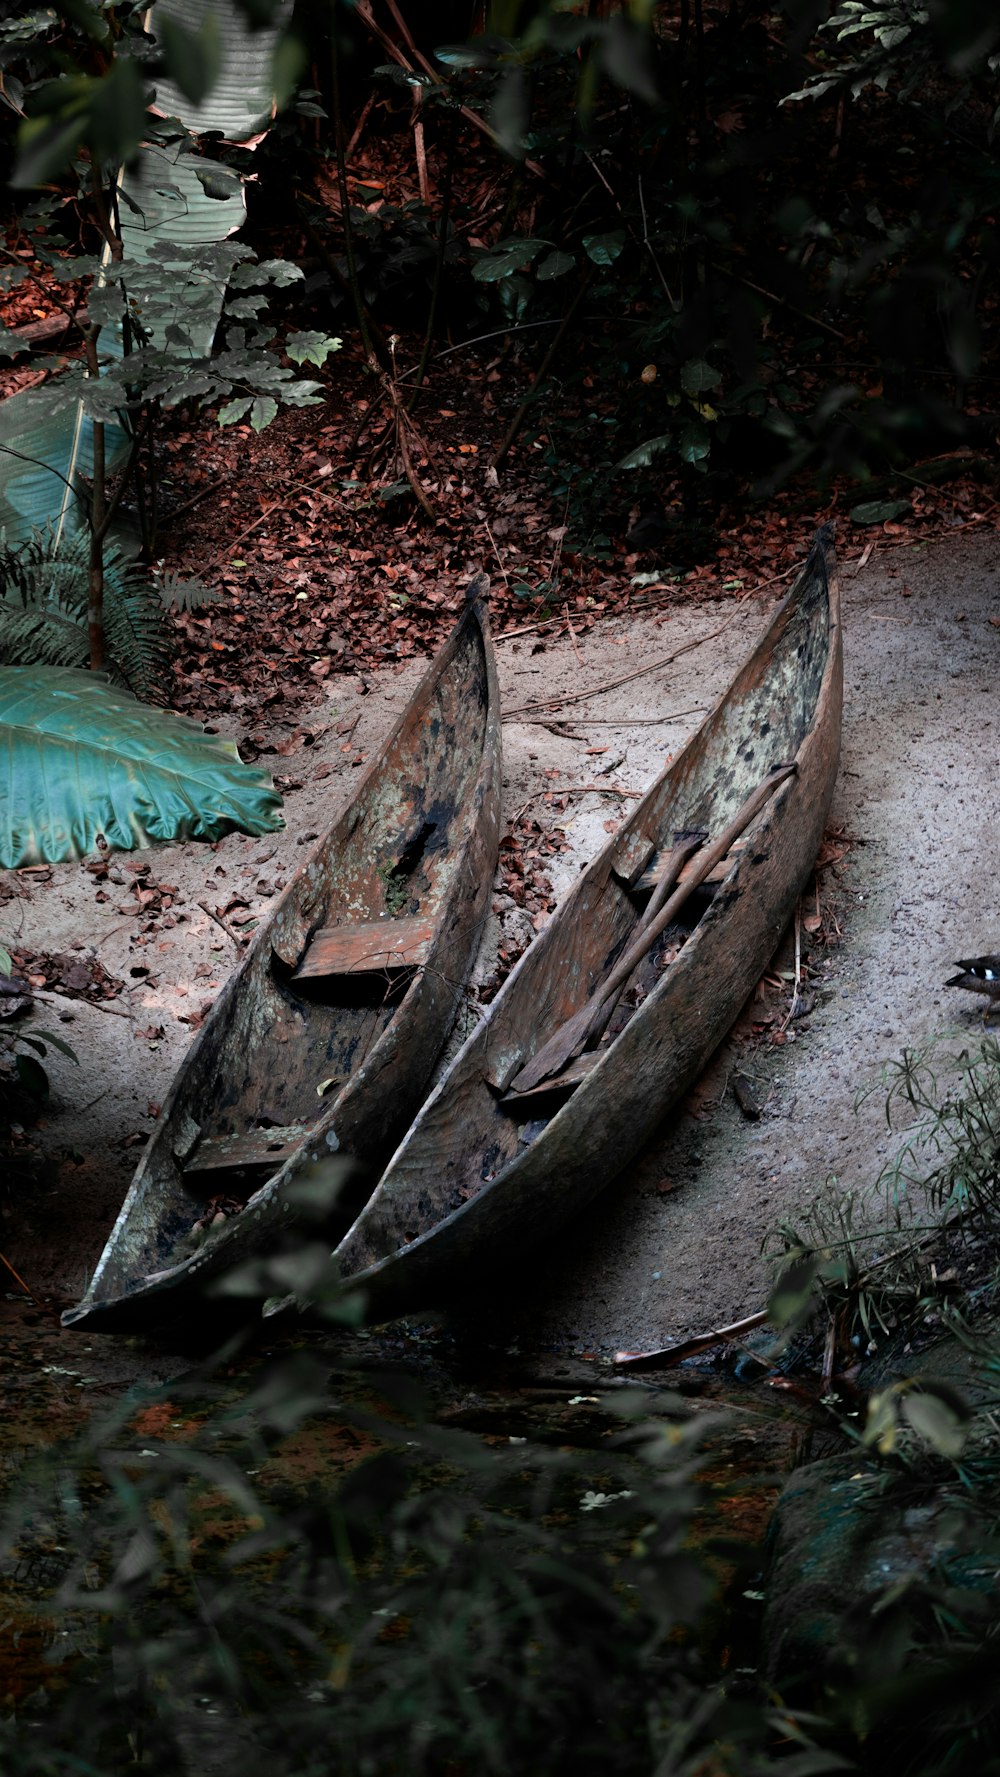 two canoes sitting on the ground next to a body of water